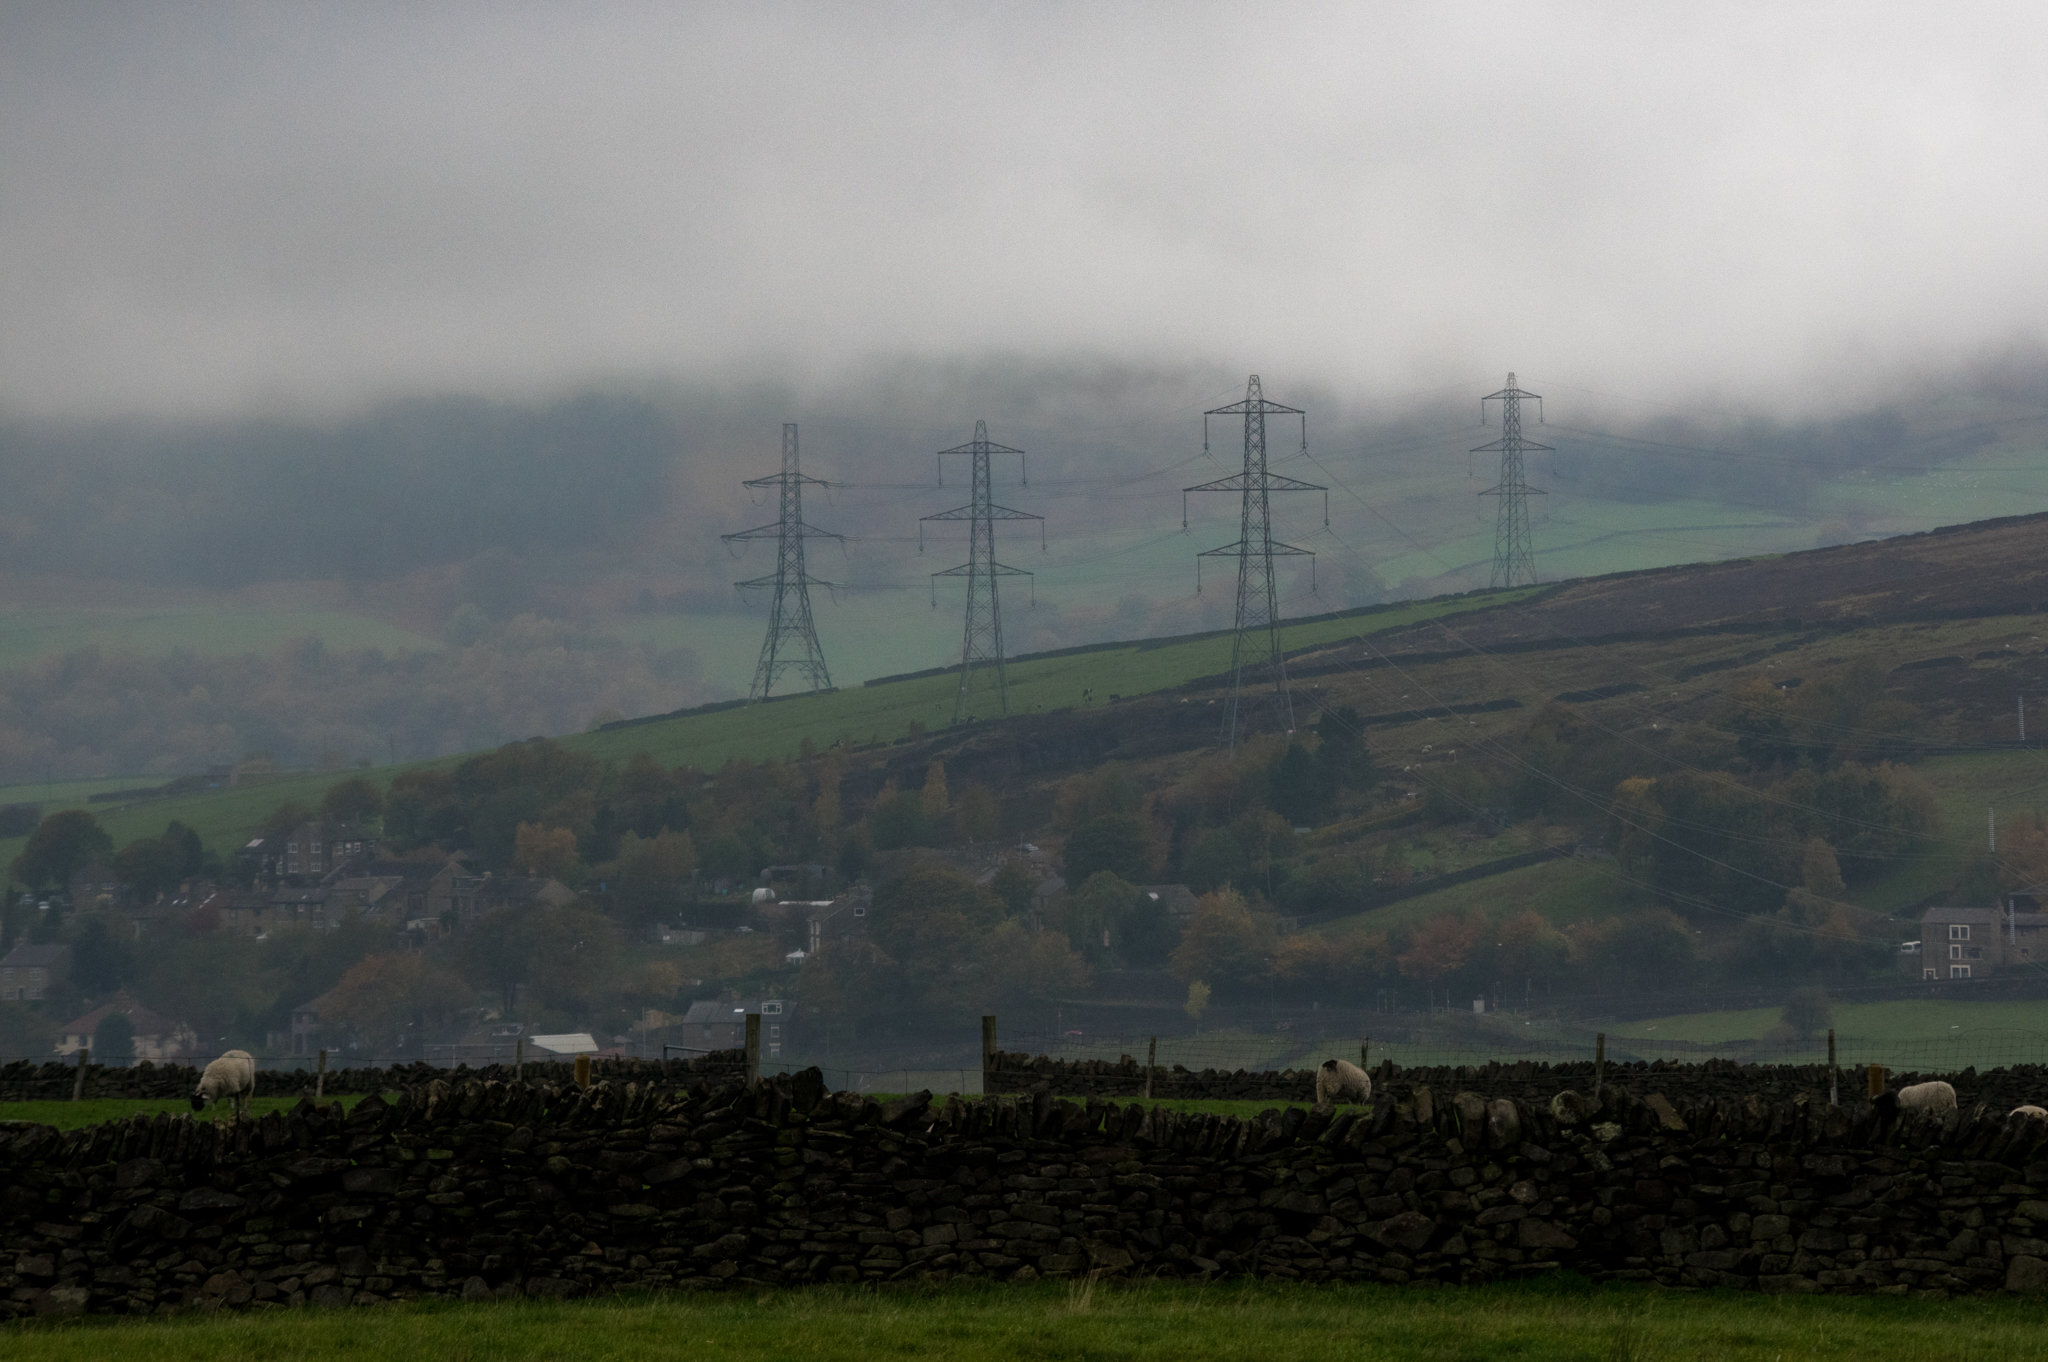 Tintwistle Pylons touching the clouds